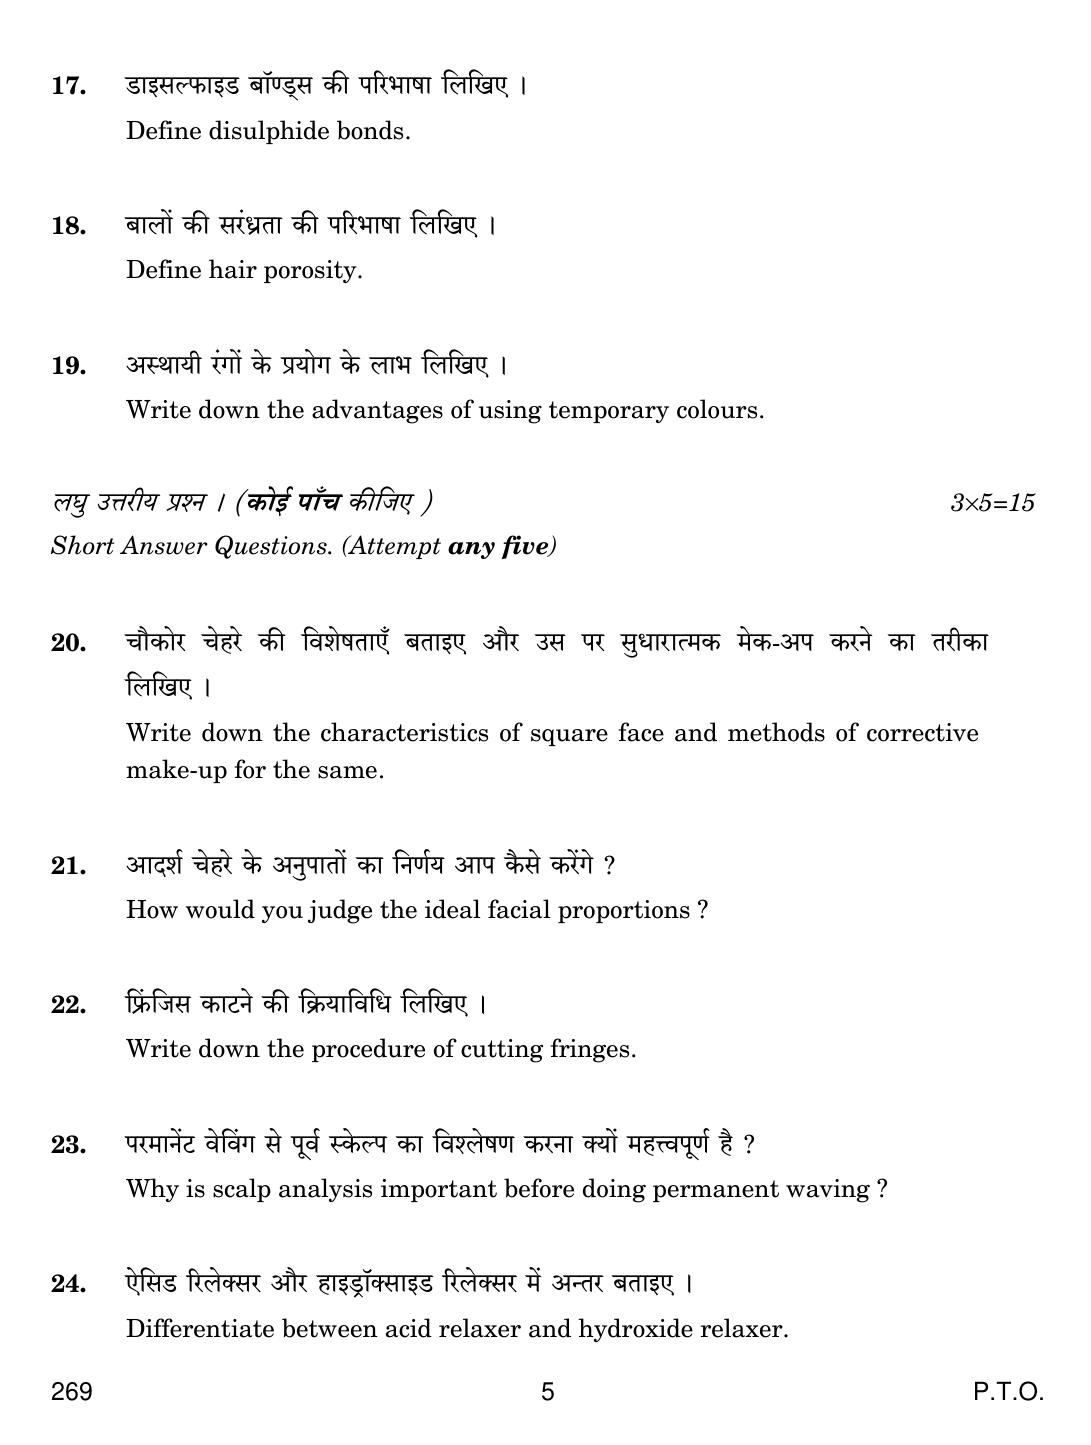 CBSE Class 12 269 Beauty And Hair 2019 Question Paper - Page 5